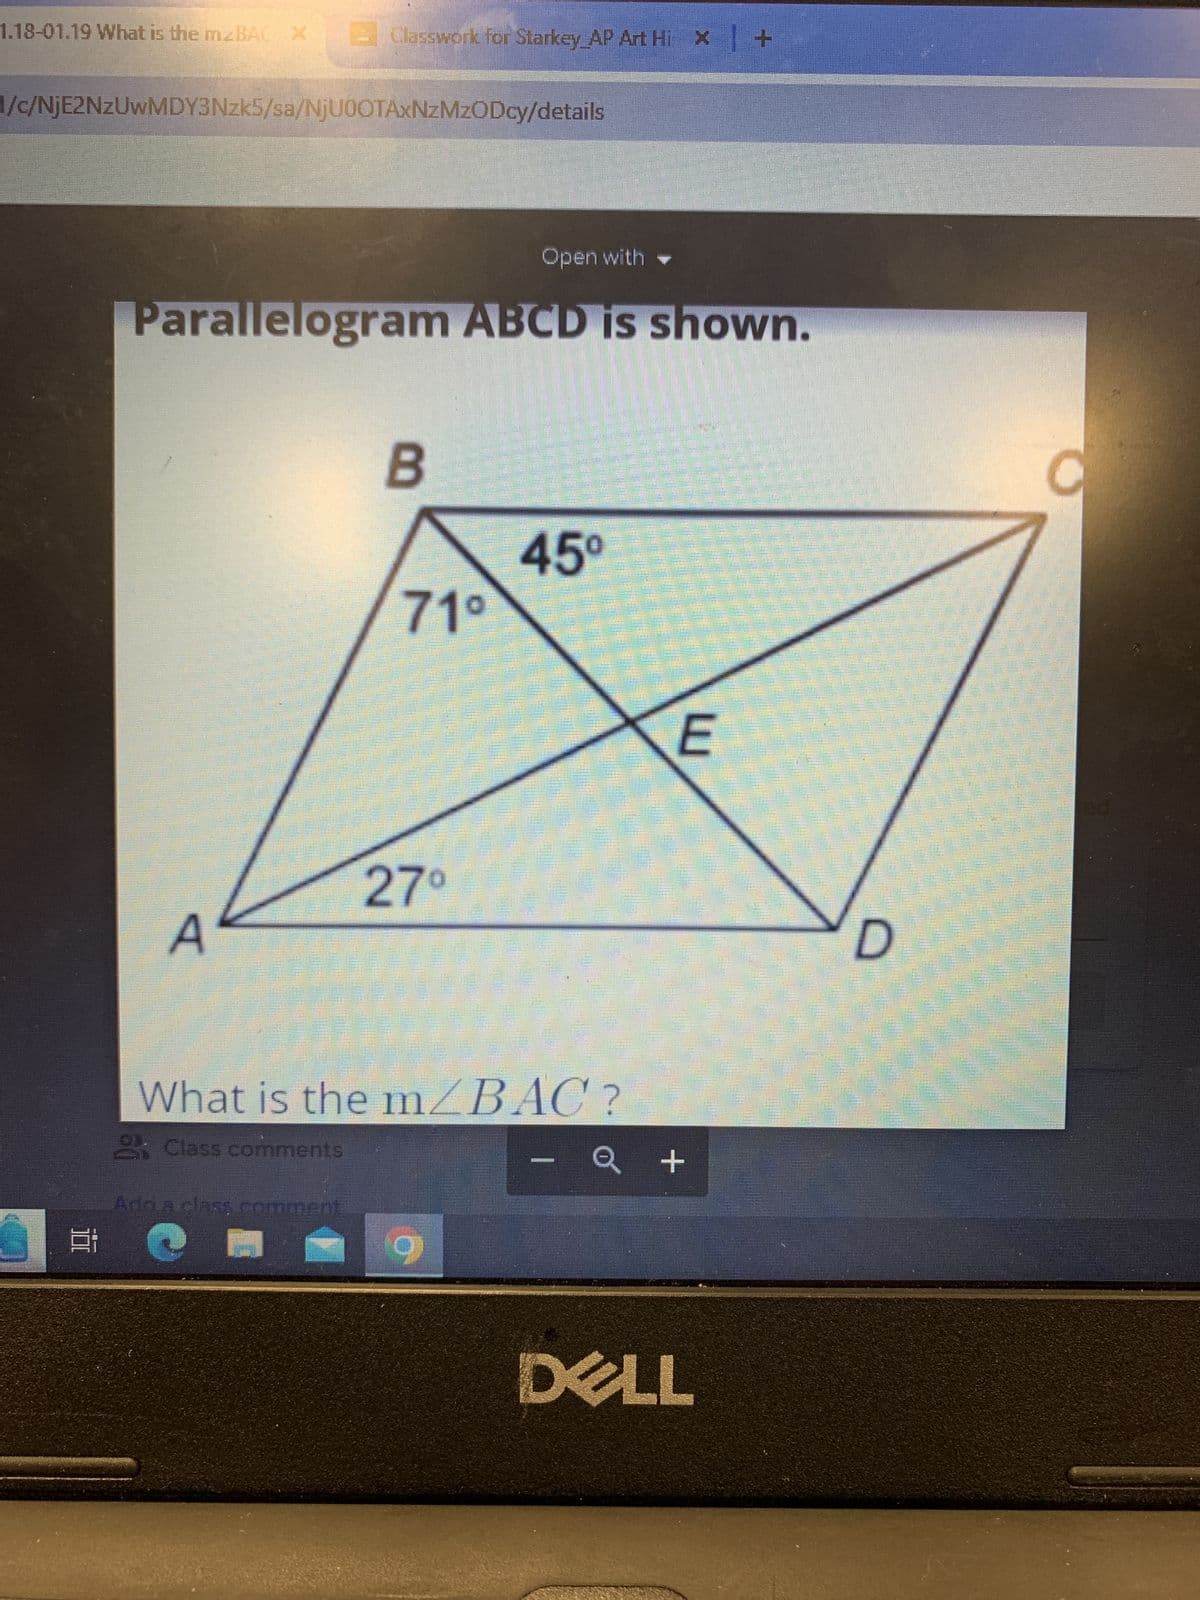 1.18-01.19 What is the mBAC X
1/c/NjE2NzUwMDY3Nzk5/sa/NjU0OTAxNzMzODcy/details
Classwork for Starkey AP Art Hi x +
Open with
Parallelogram ABCD is shown.
A
Ard a class comment
B
71⁰
27⁰
What is the m/BAC?
& Class comments
45⁰
9
H
E
- Q +
DELL
D
M
C